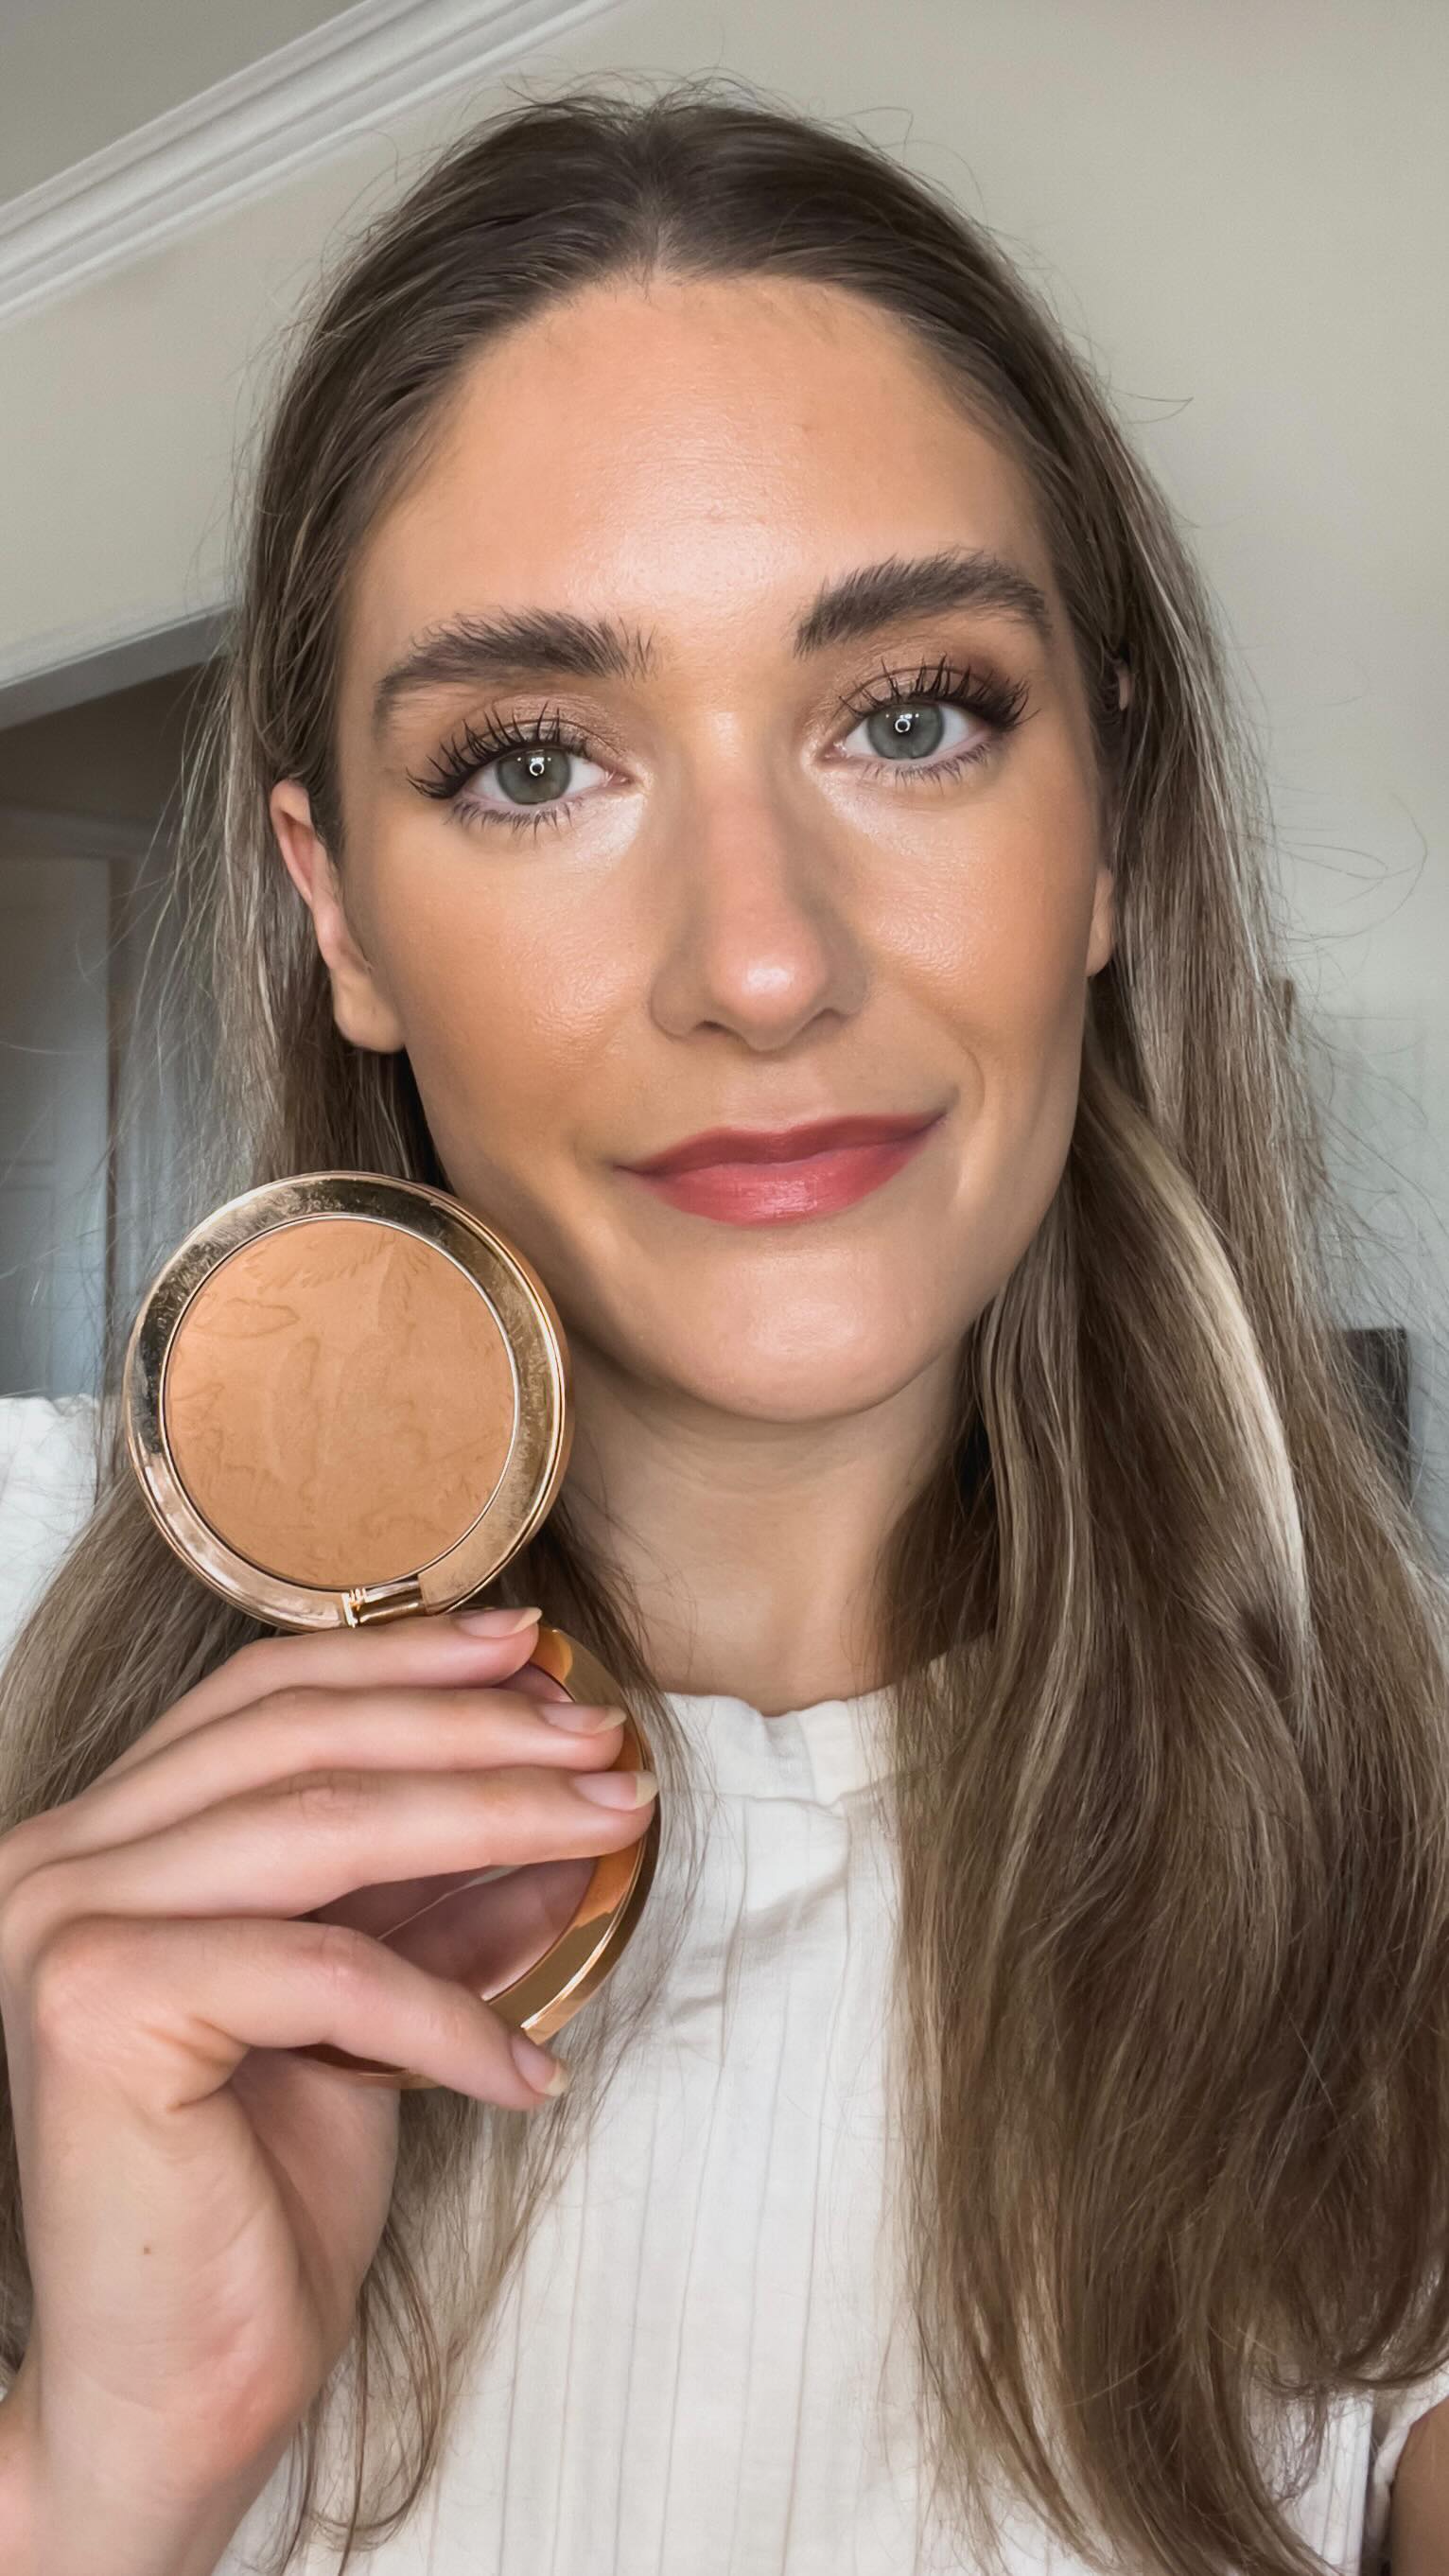 I had to pick up the @beautypie bronzers as soon as I saw them. I love that they're refillable so I was able to buy one with the compact (Light shade Goldielux) and then one refill pan (Medium shade Soleil All Day). I apply both here so you can see how they work on my skintone. I think Soleil All Day is a bit too dark and warm for me but because the formula is SO easy to blend, it does work for me. I prefer Goldielux but I do with there was a color that was a bit deeper than Goldielux and less warm. I LOVE how smooth and easy to blend the formula is, it would honestly be my new fav powder bronzer if the shade was a bit more neutral! #beautypie #bronzerreview

Use GARSOWTWINSSENTME at beauty pie for $10 off